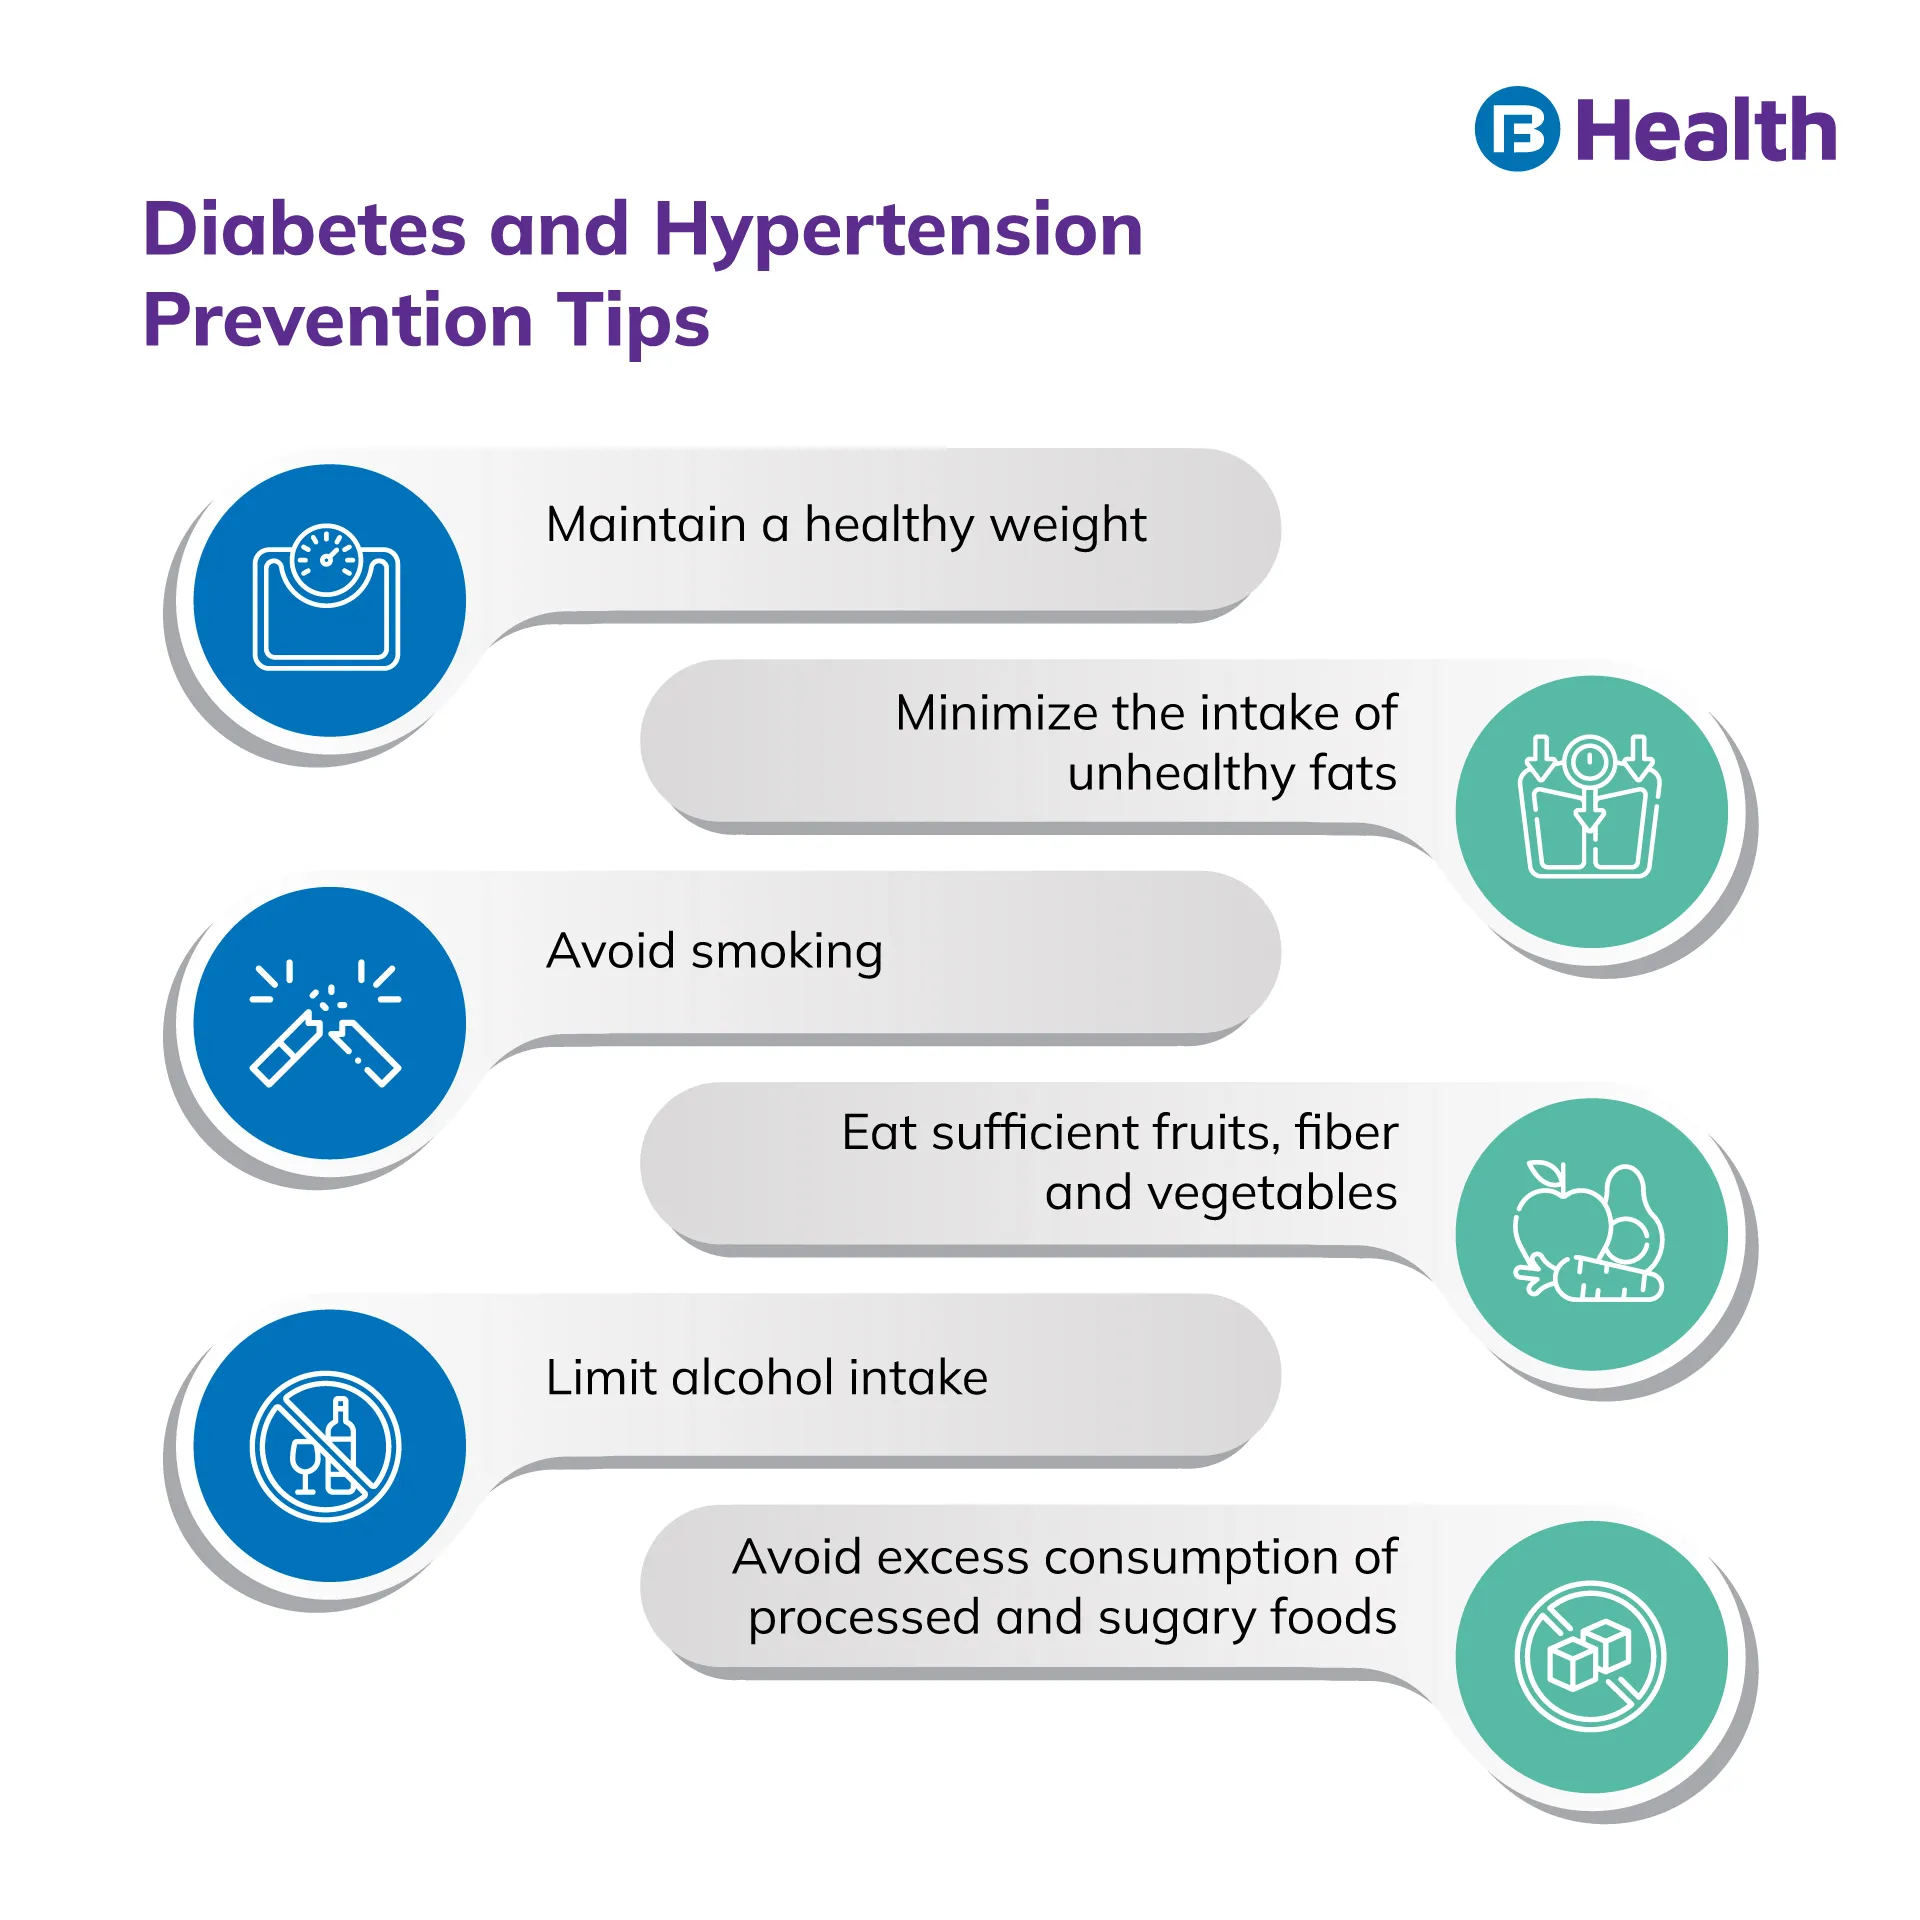 Diabetes and Hypertension Prevention Tips